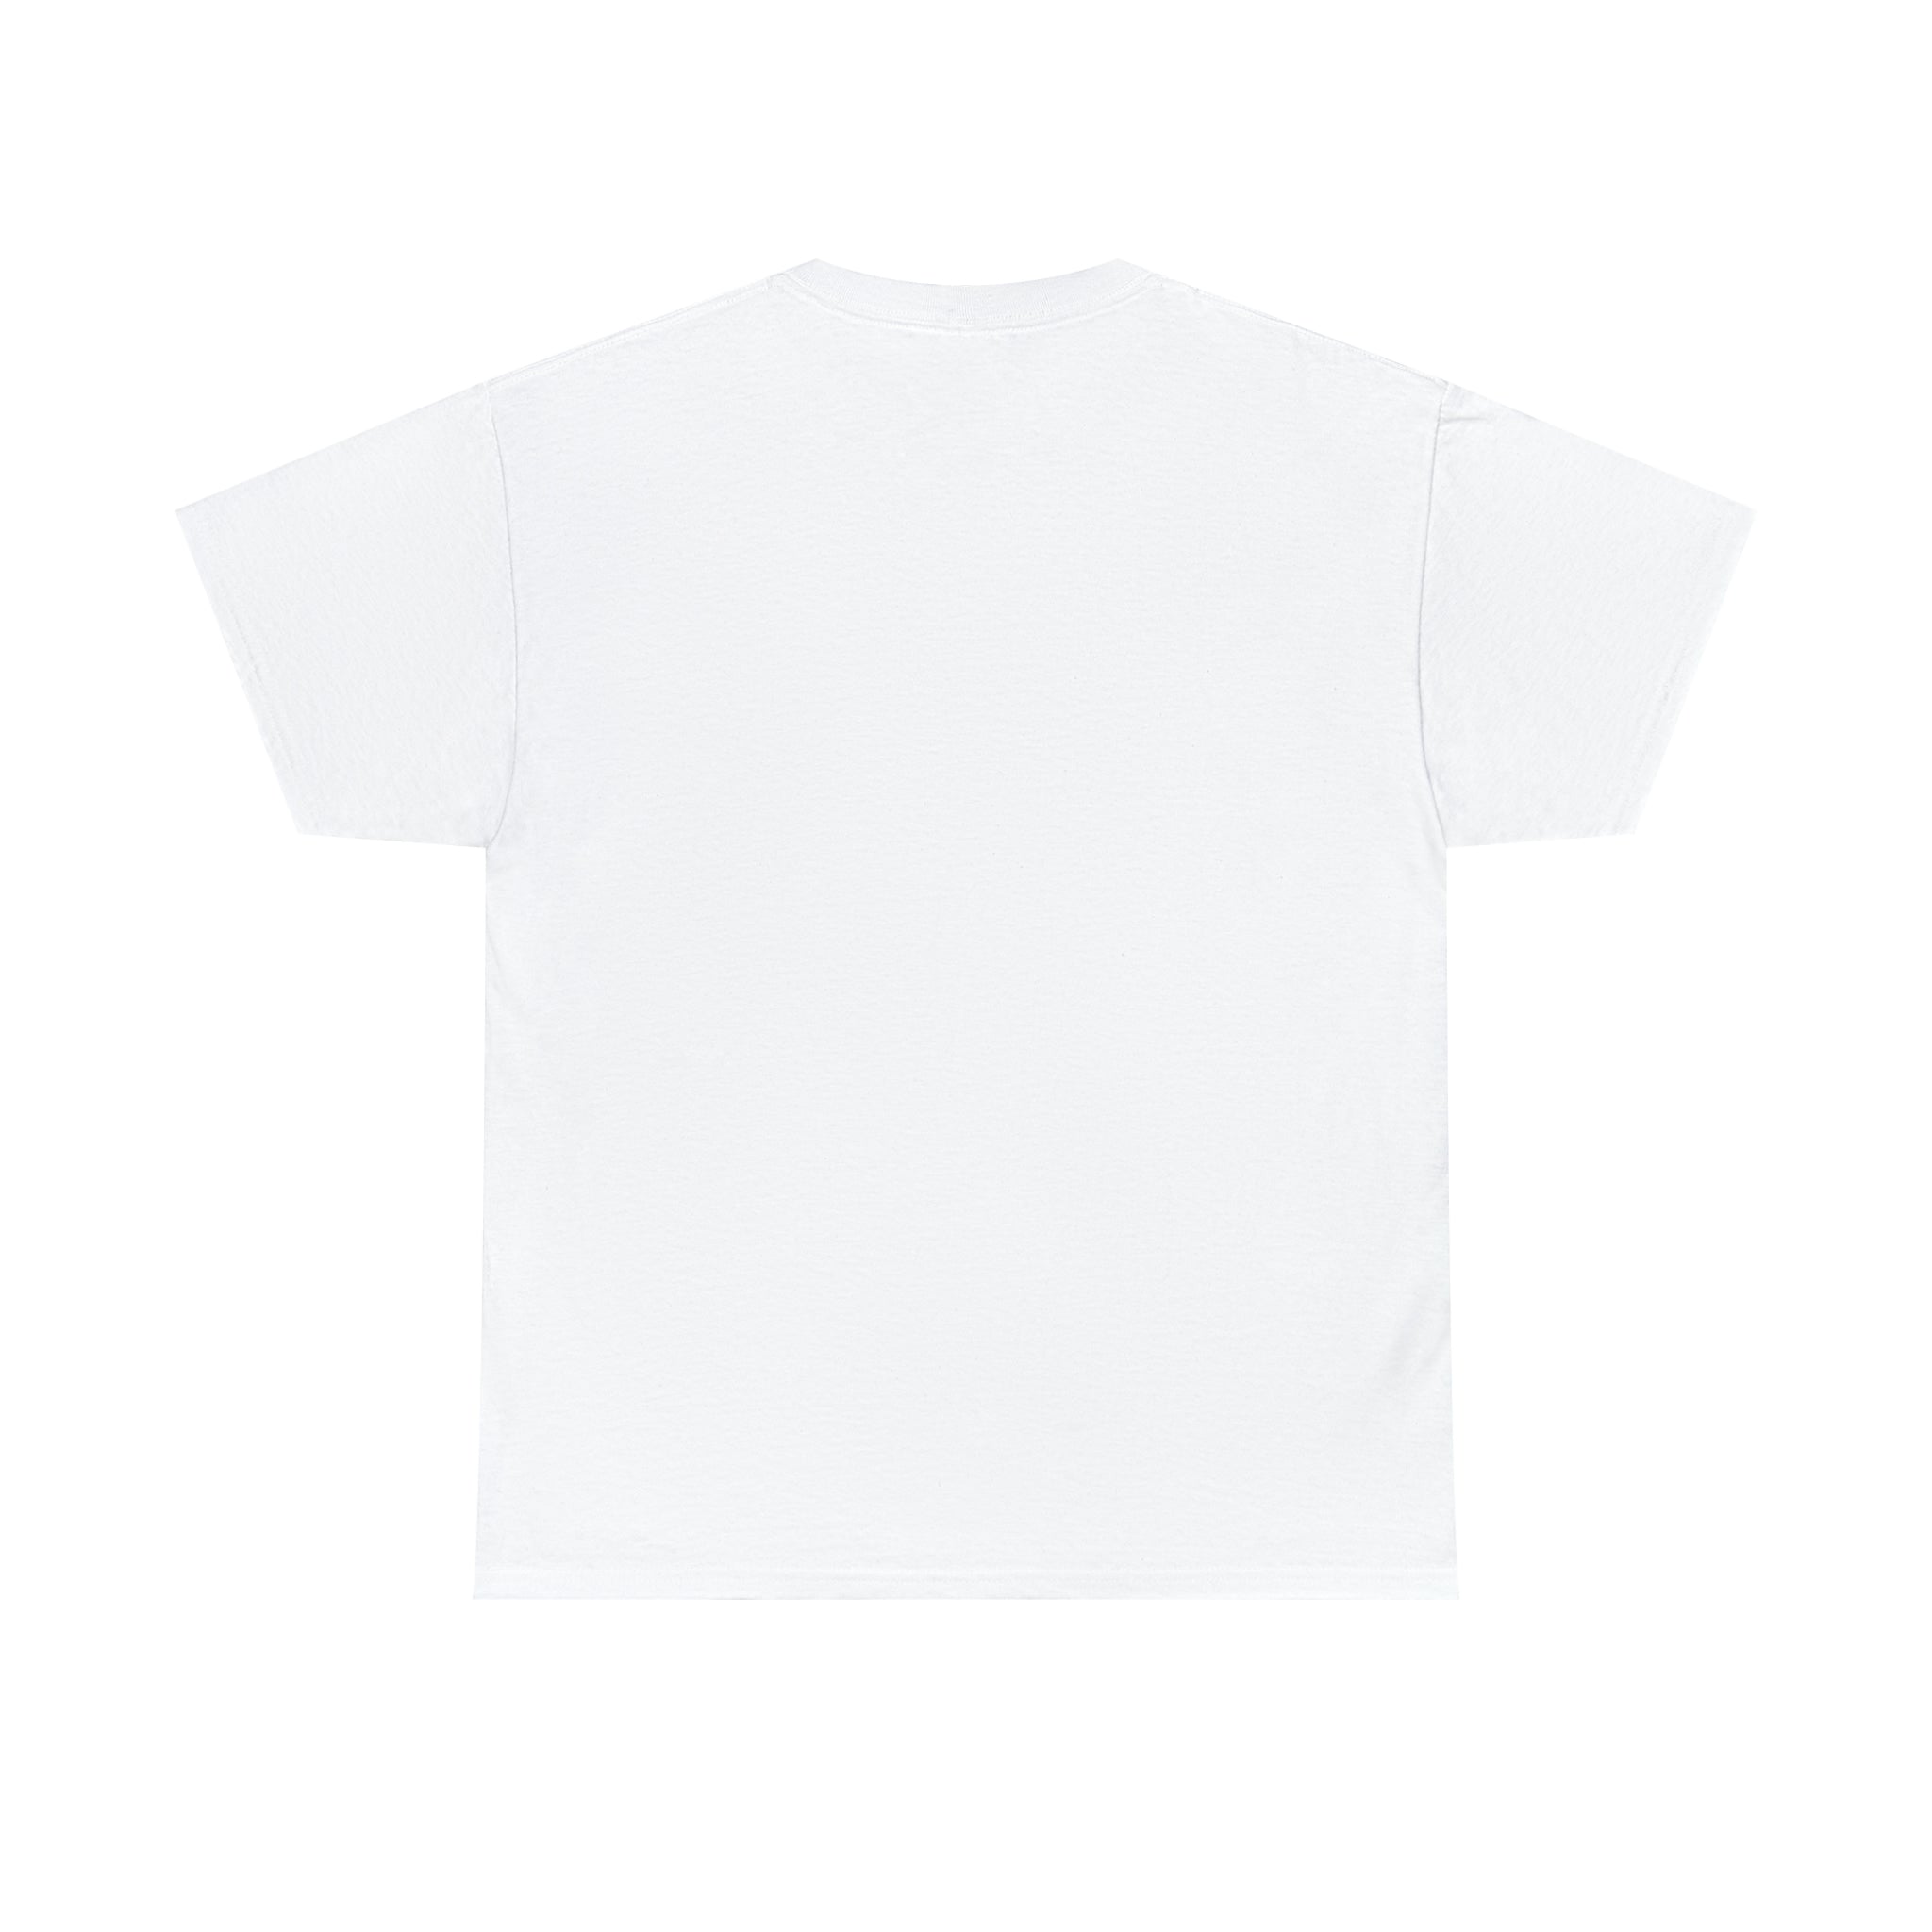 Connor Roy for President - Unisex Heavy Cotton Tee